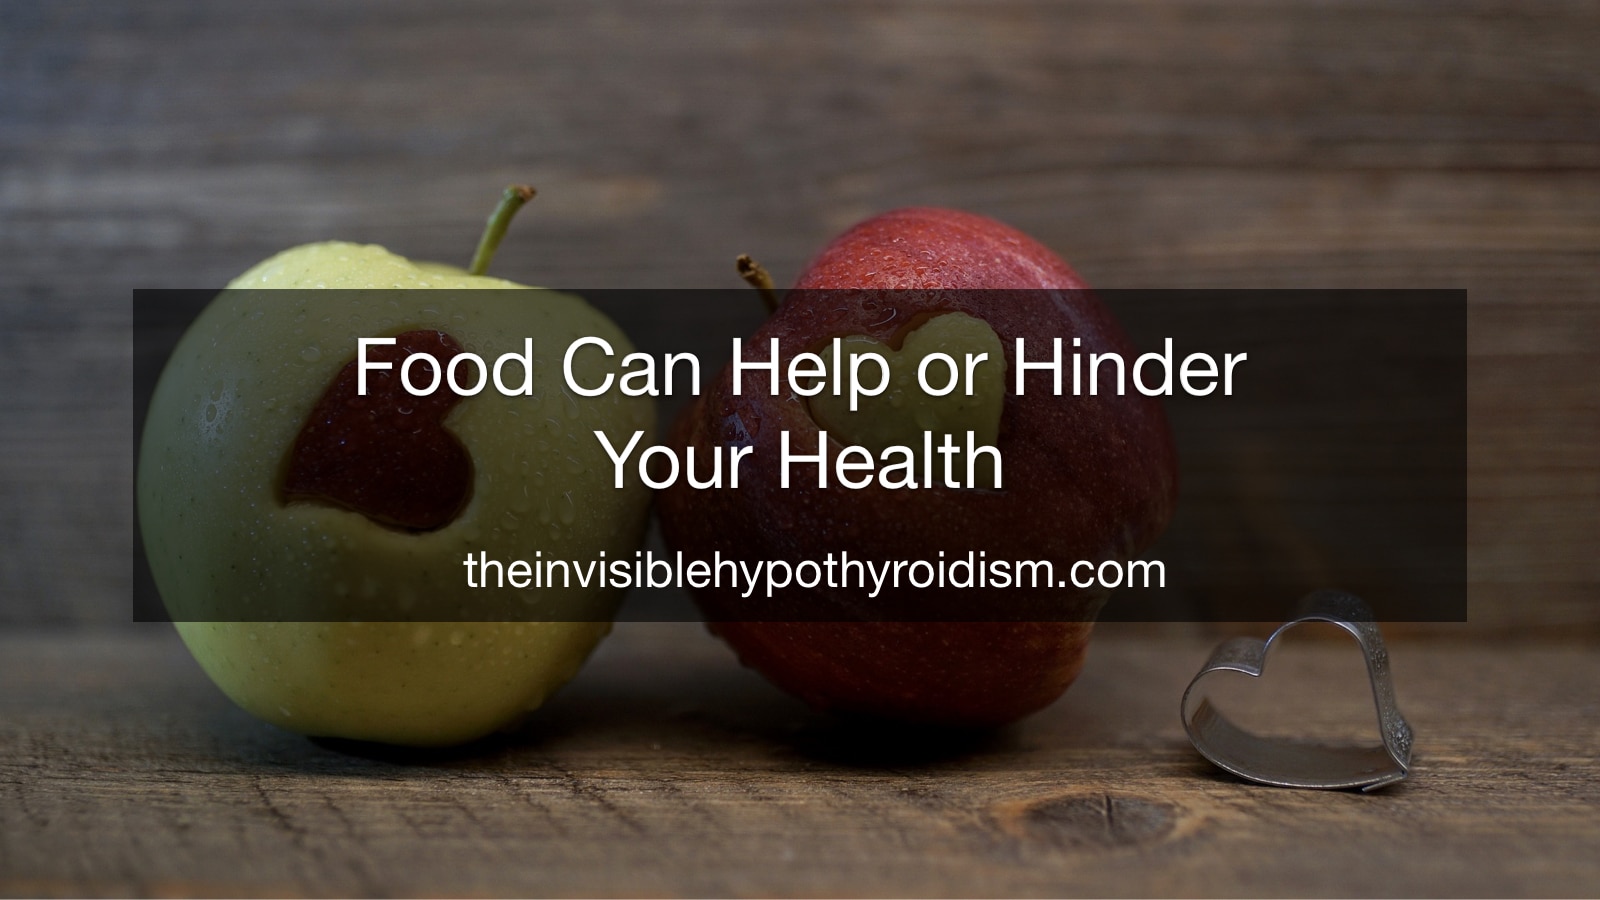 Food Can Help or Hinder Your Health